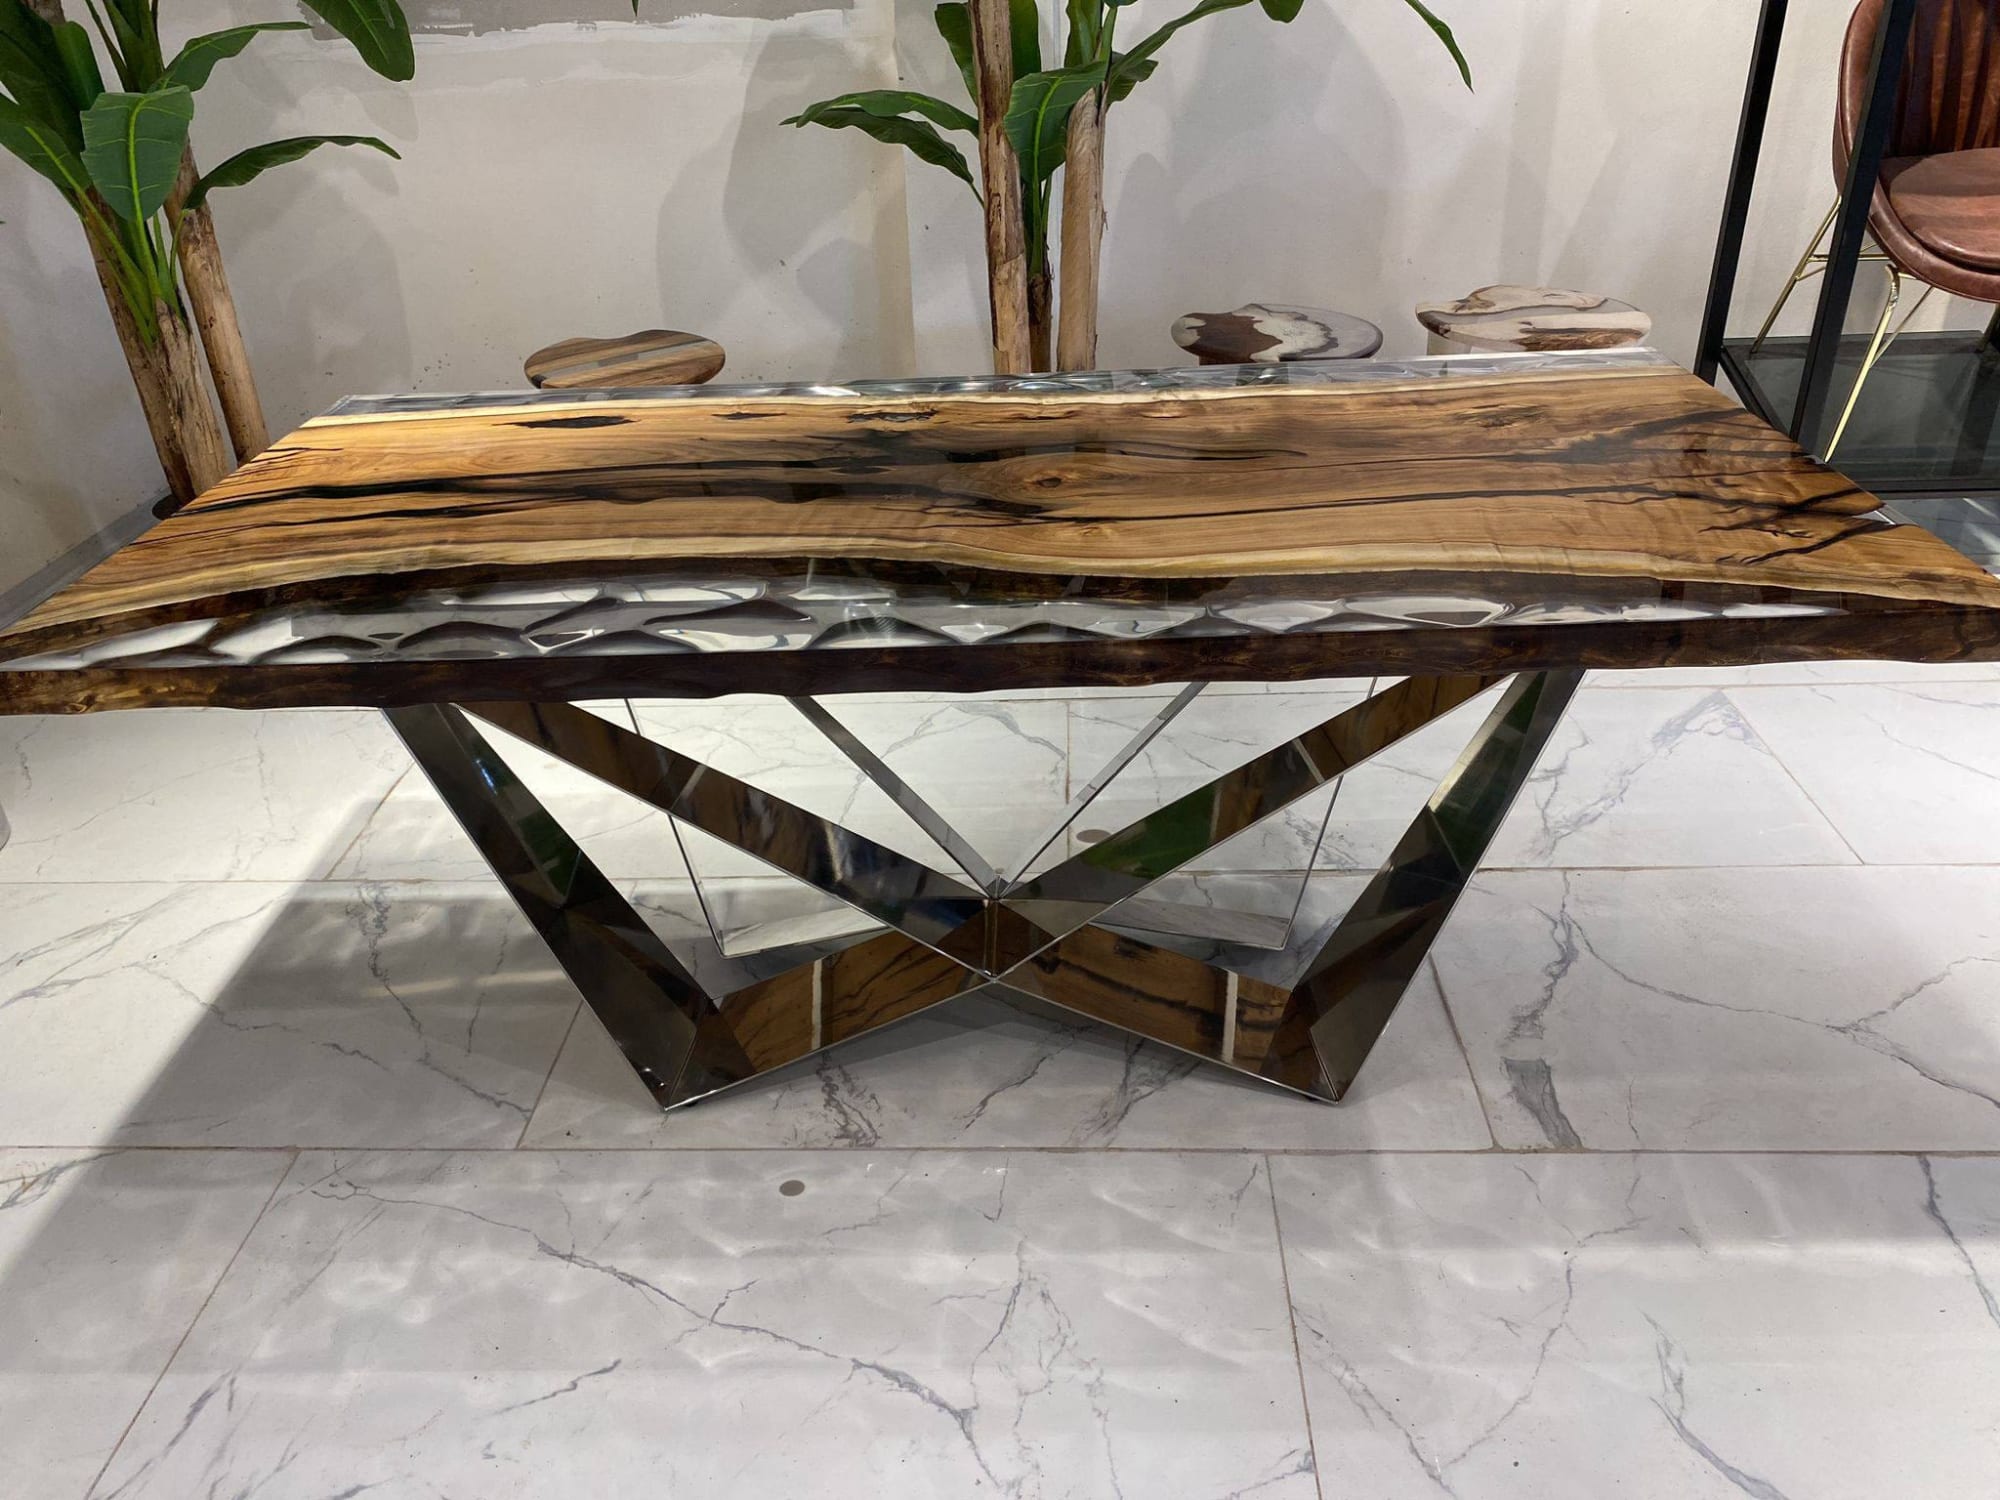 Made to Order Custom Table, Clear Epoxy Resin Table with Bench